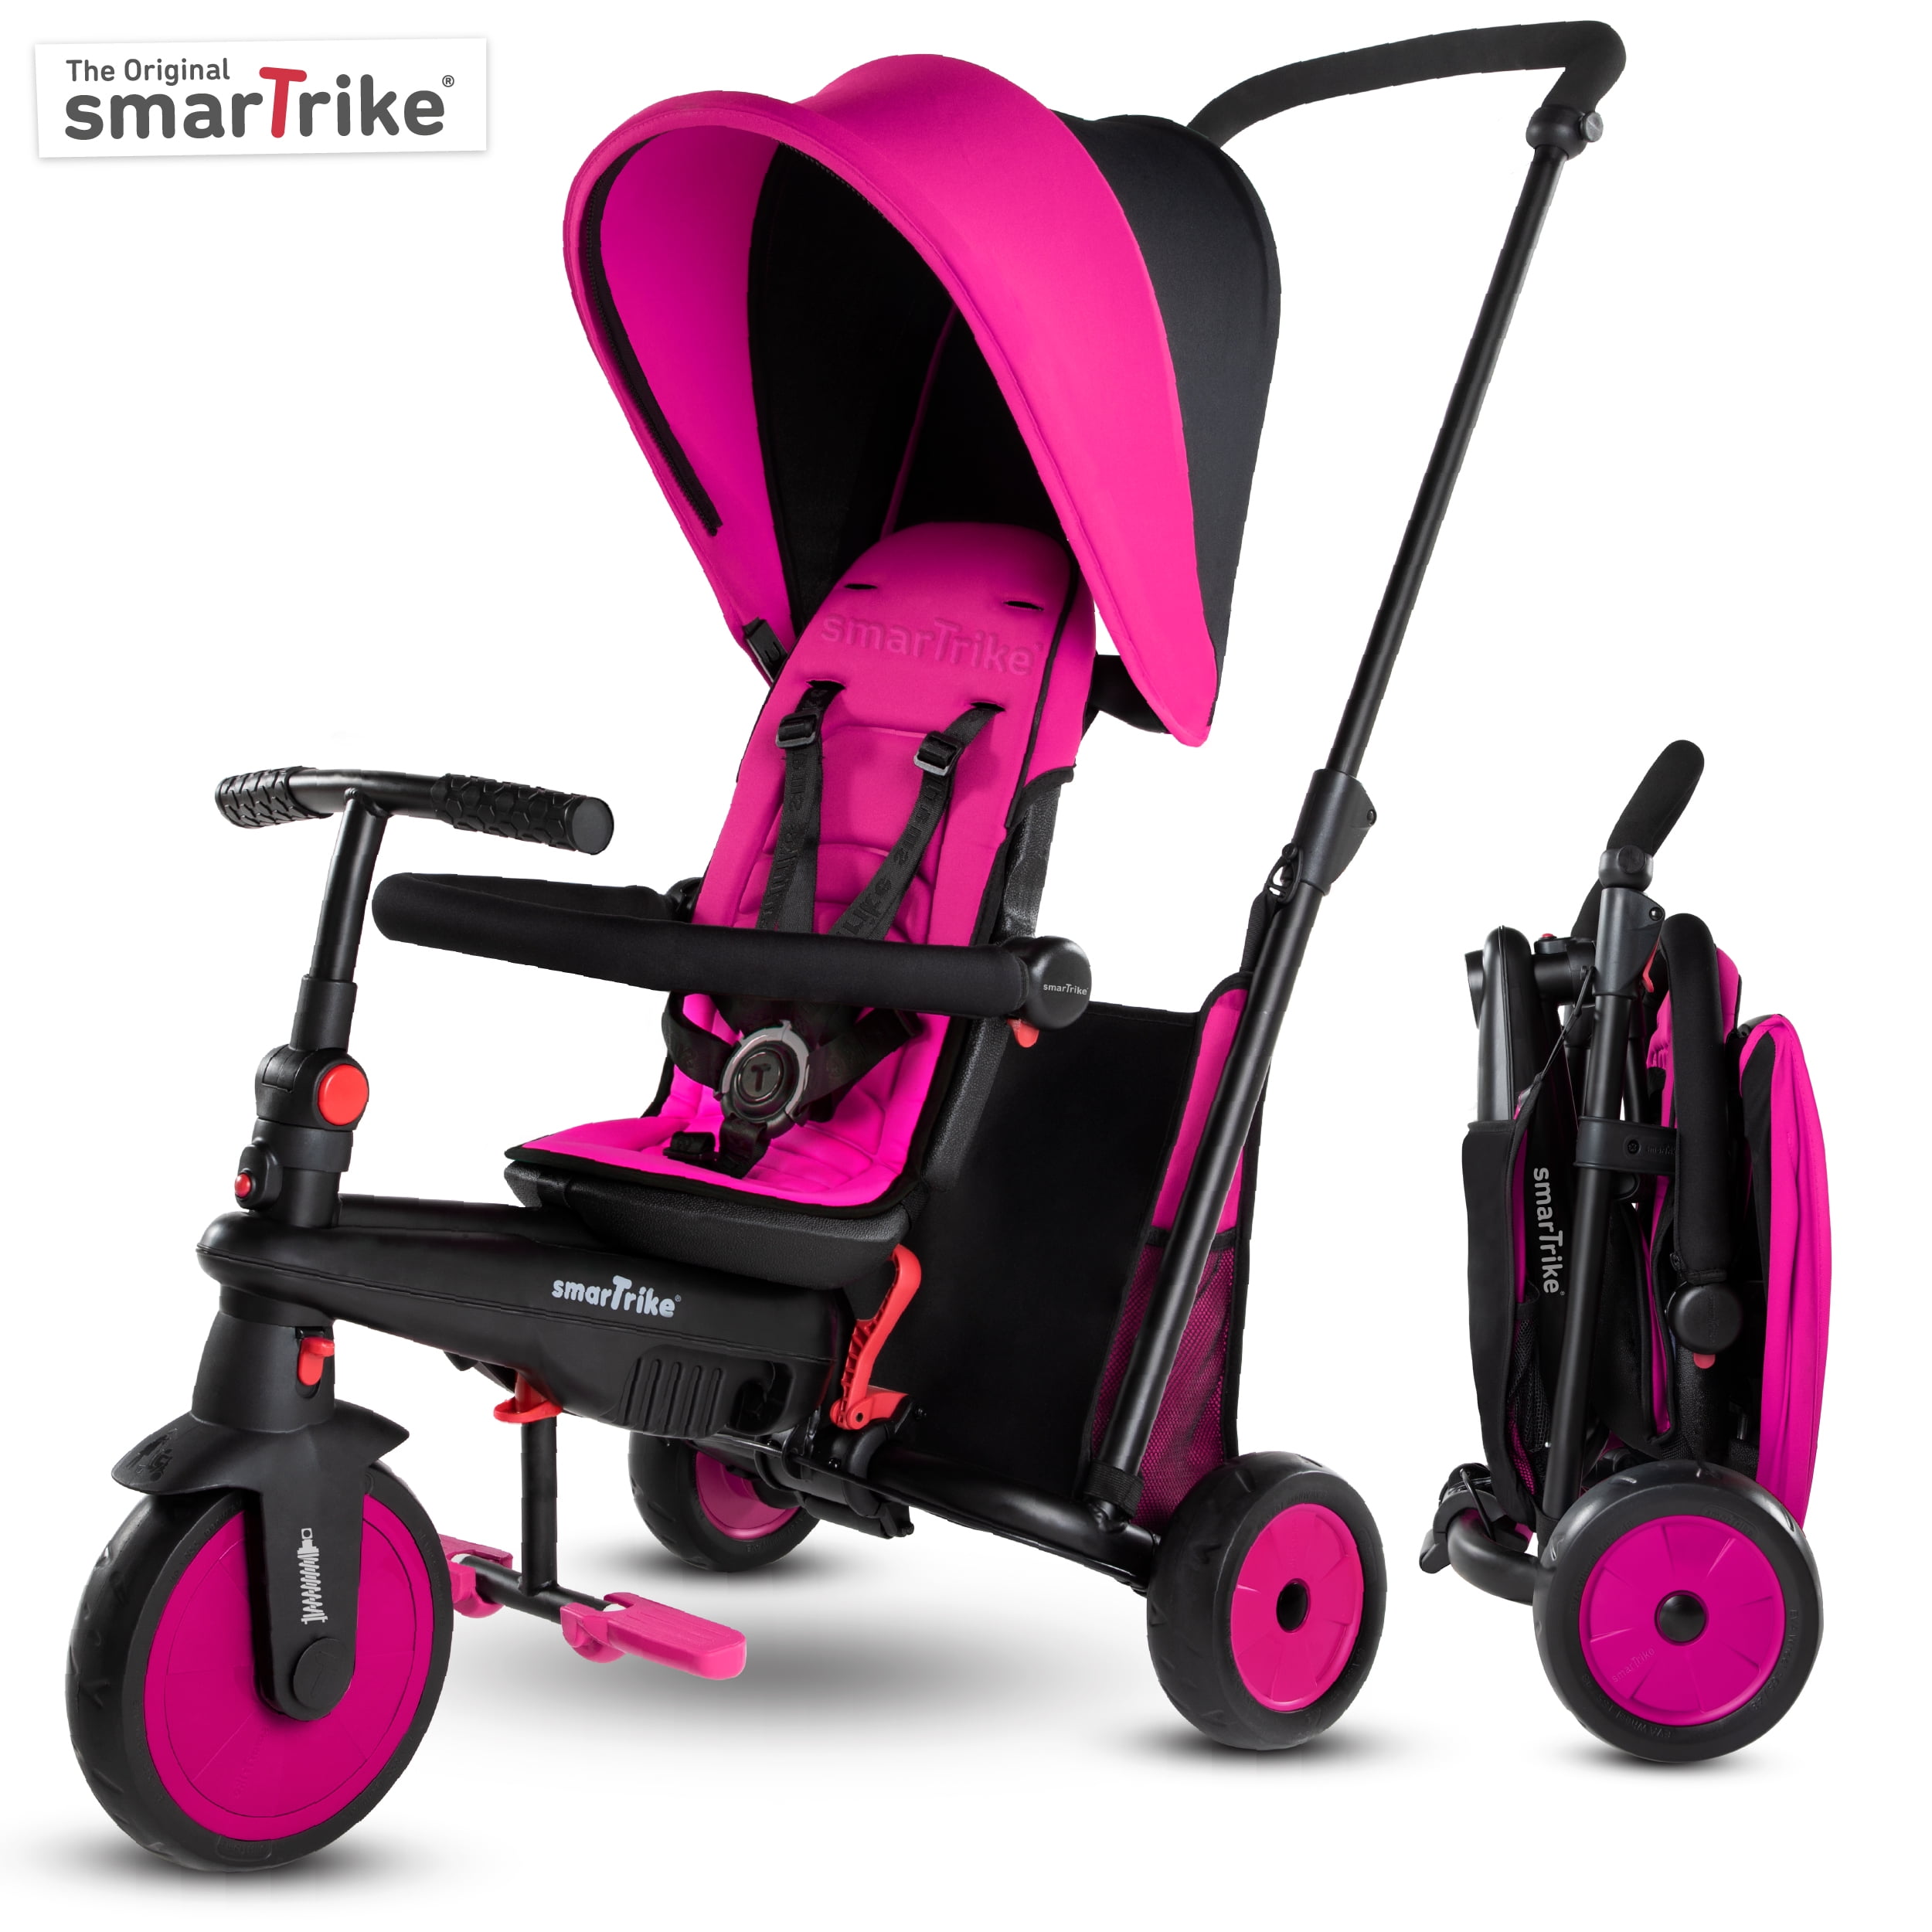 completely collapsible stroller